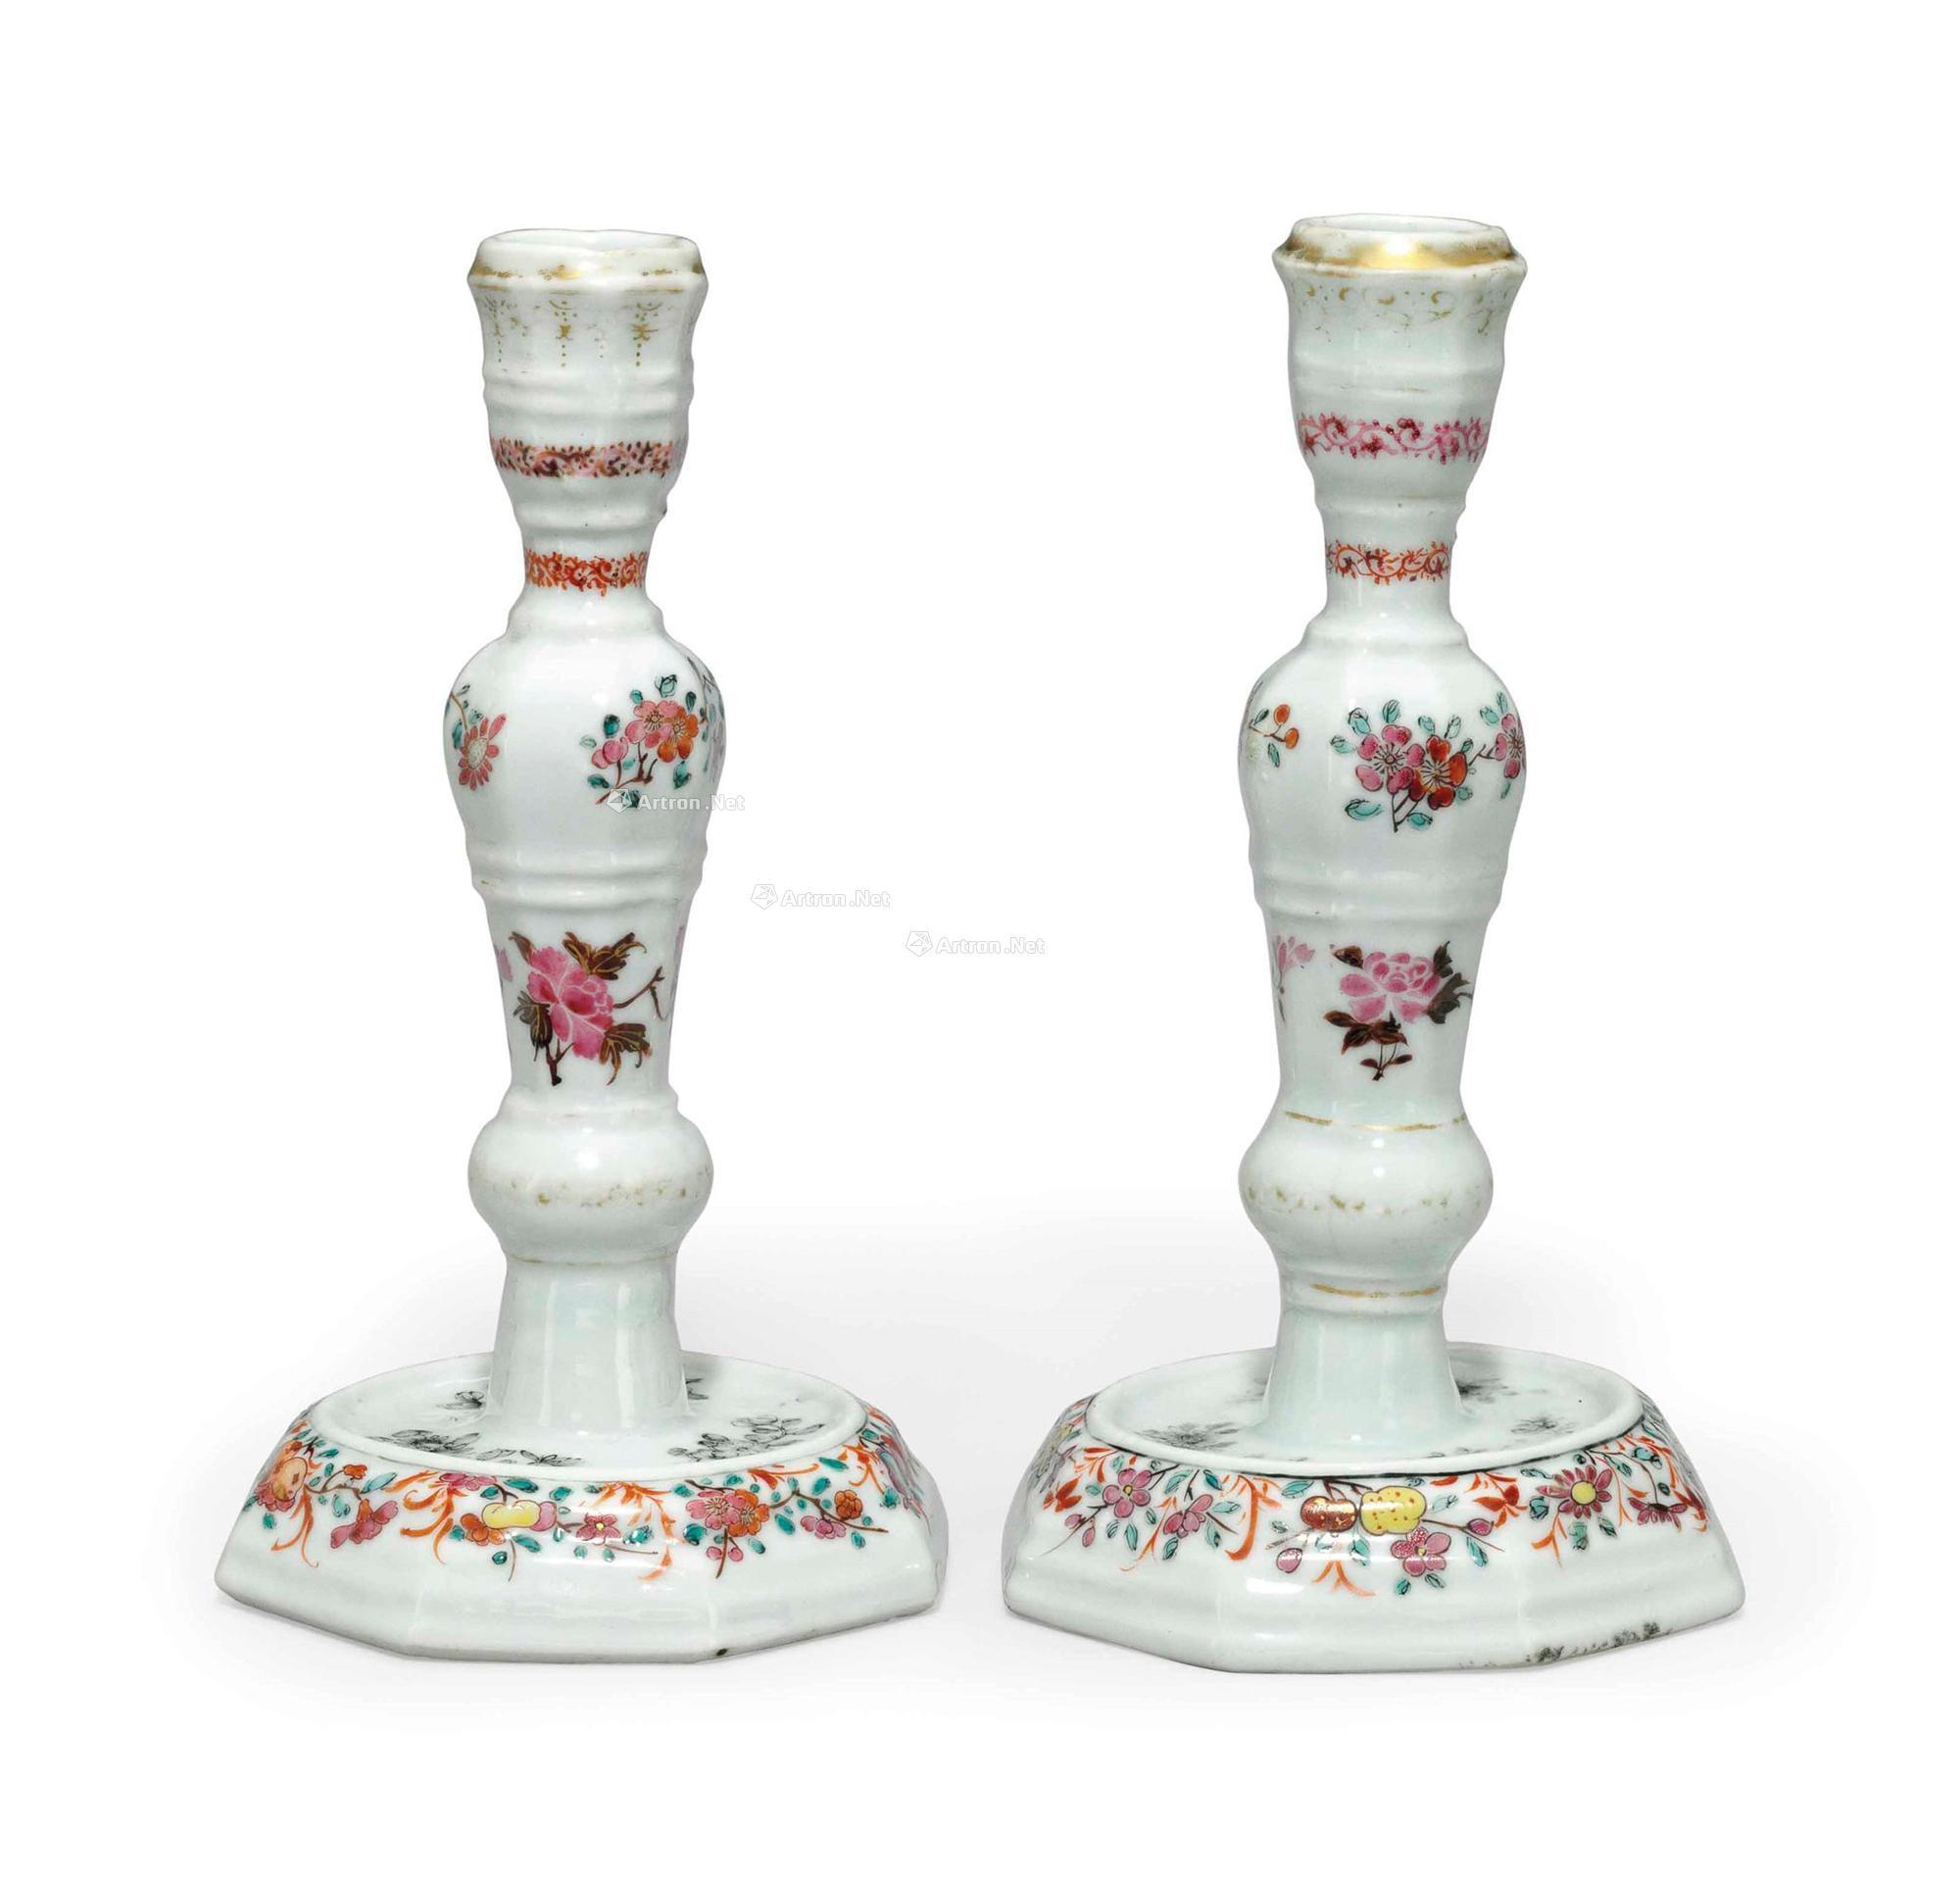 The qianlong period, 1735-96 - A PAIR OF FAMILLE ROSE CANDLESTICKS